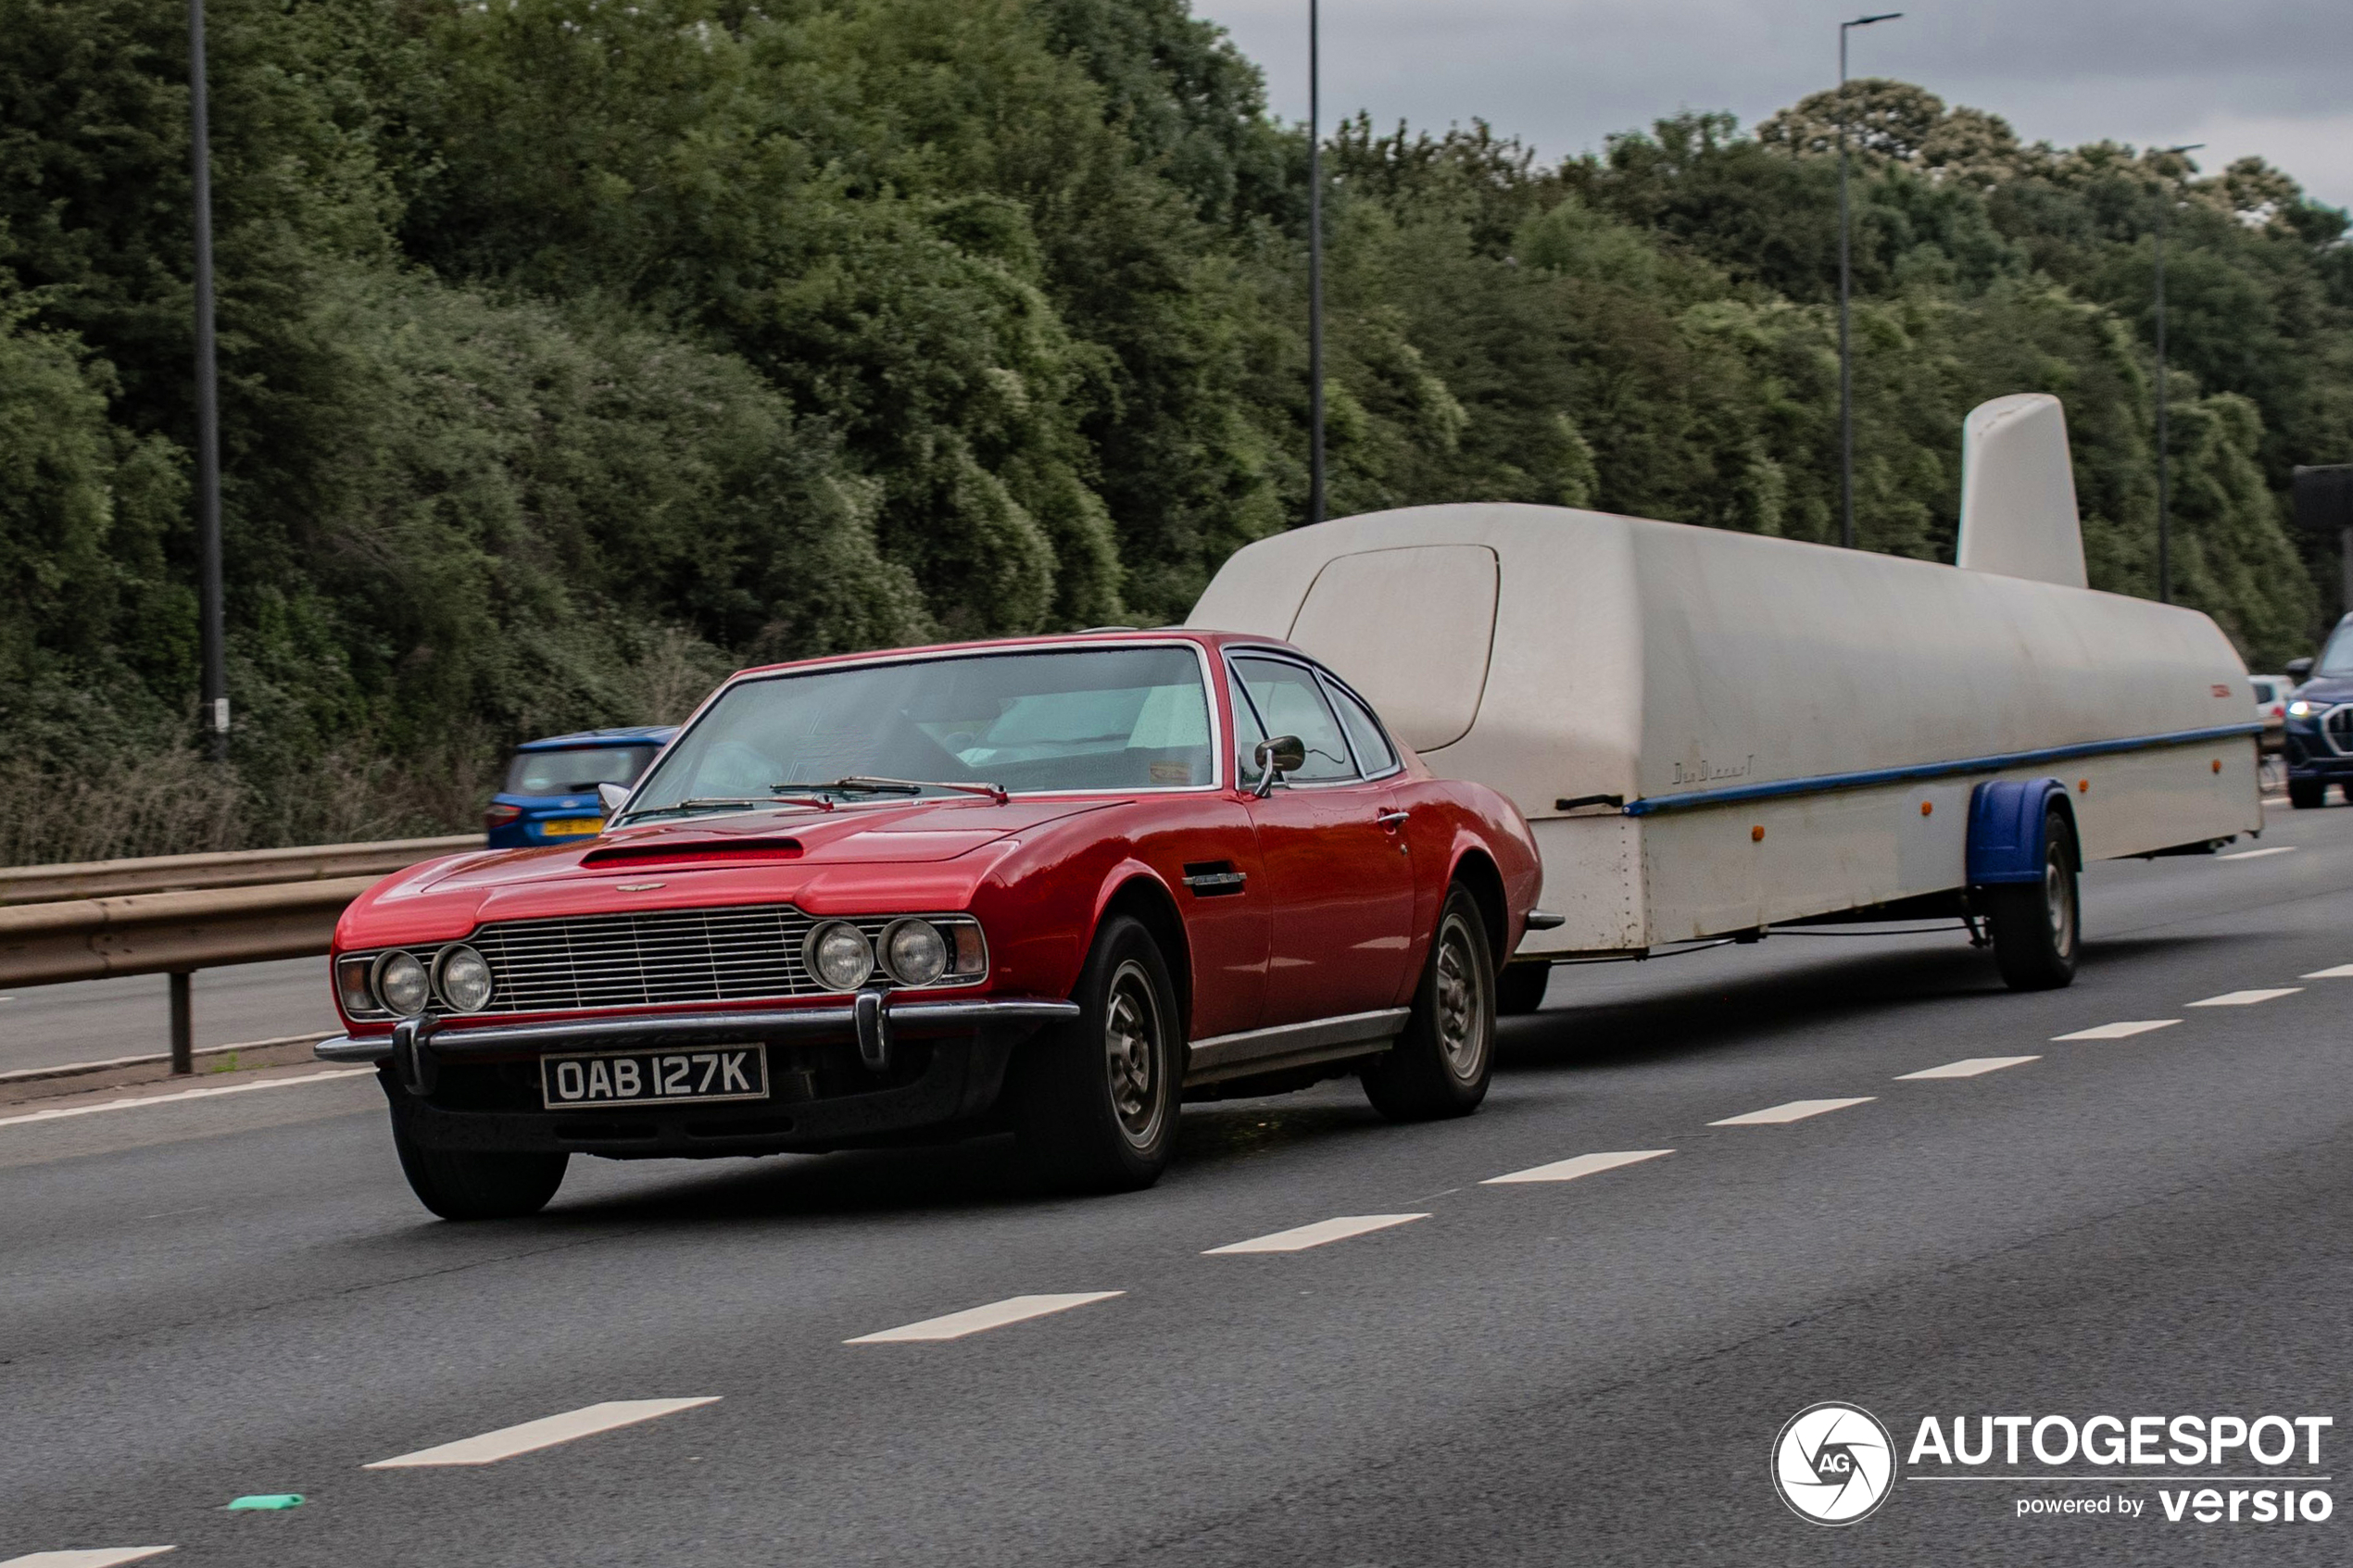 An old DBS with a trailer drives on the highway